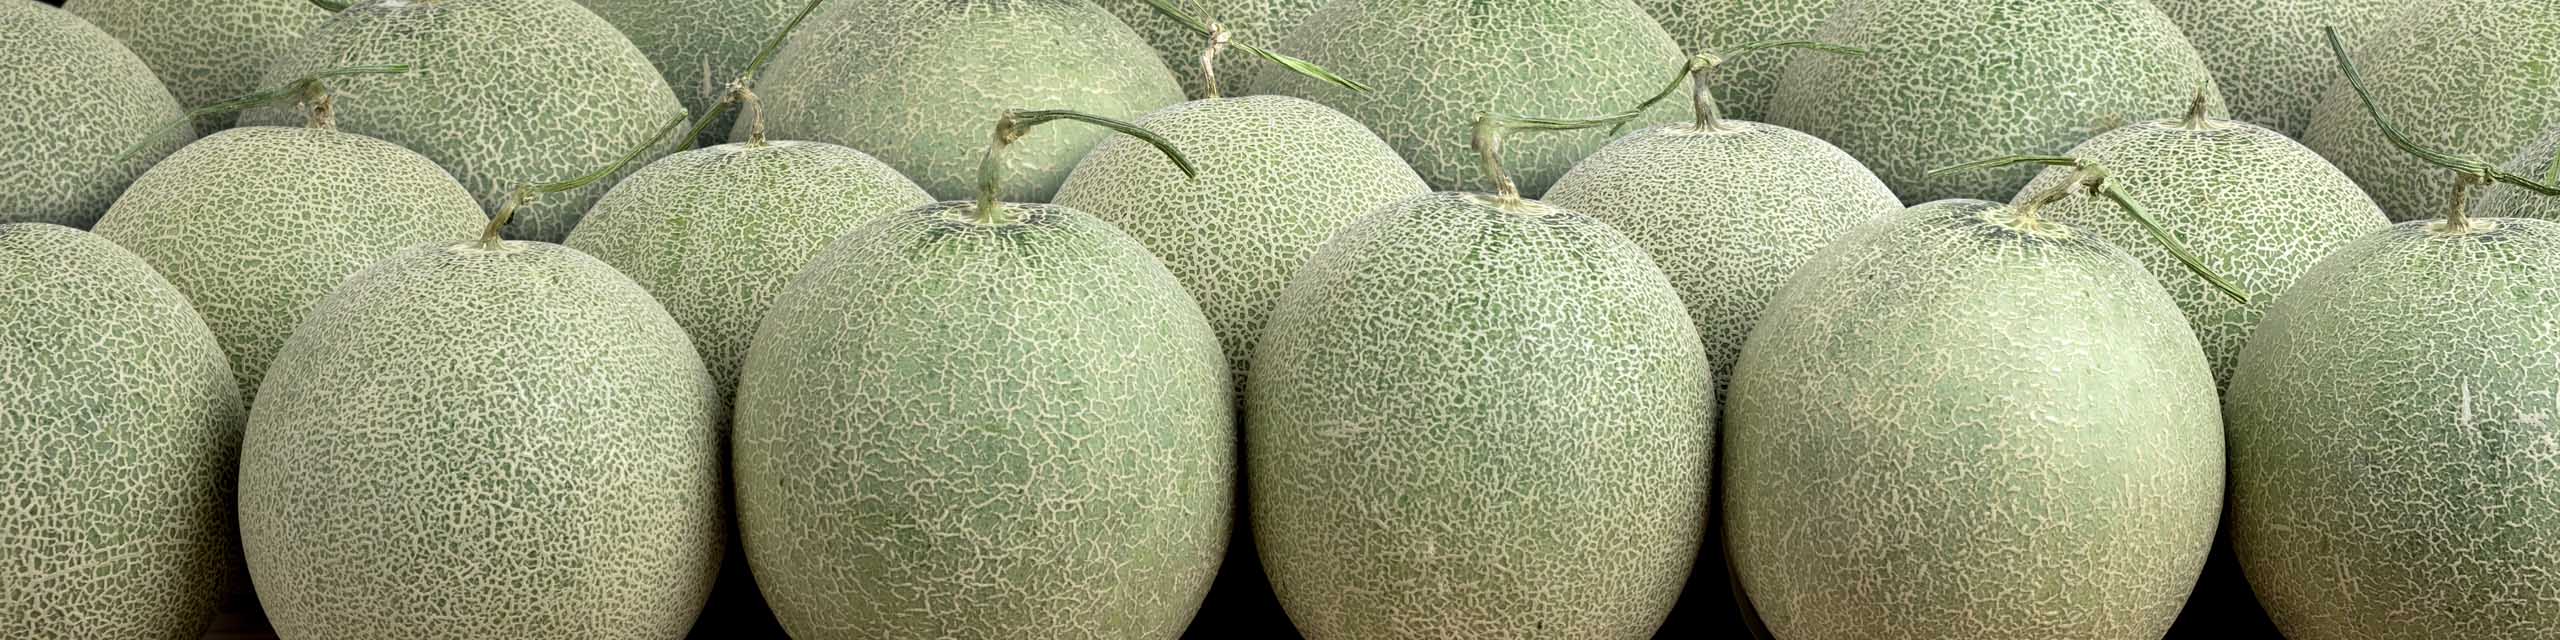 Rows of harvested cantaloupe fruit.